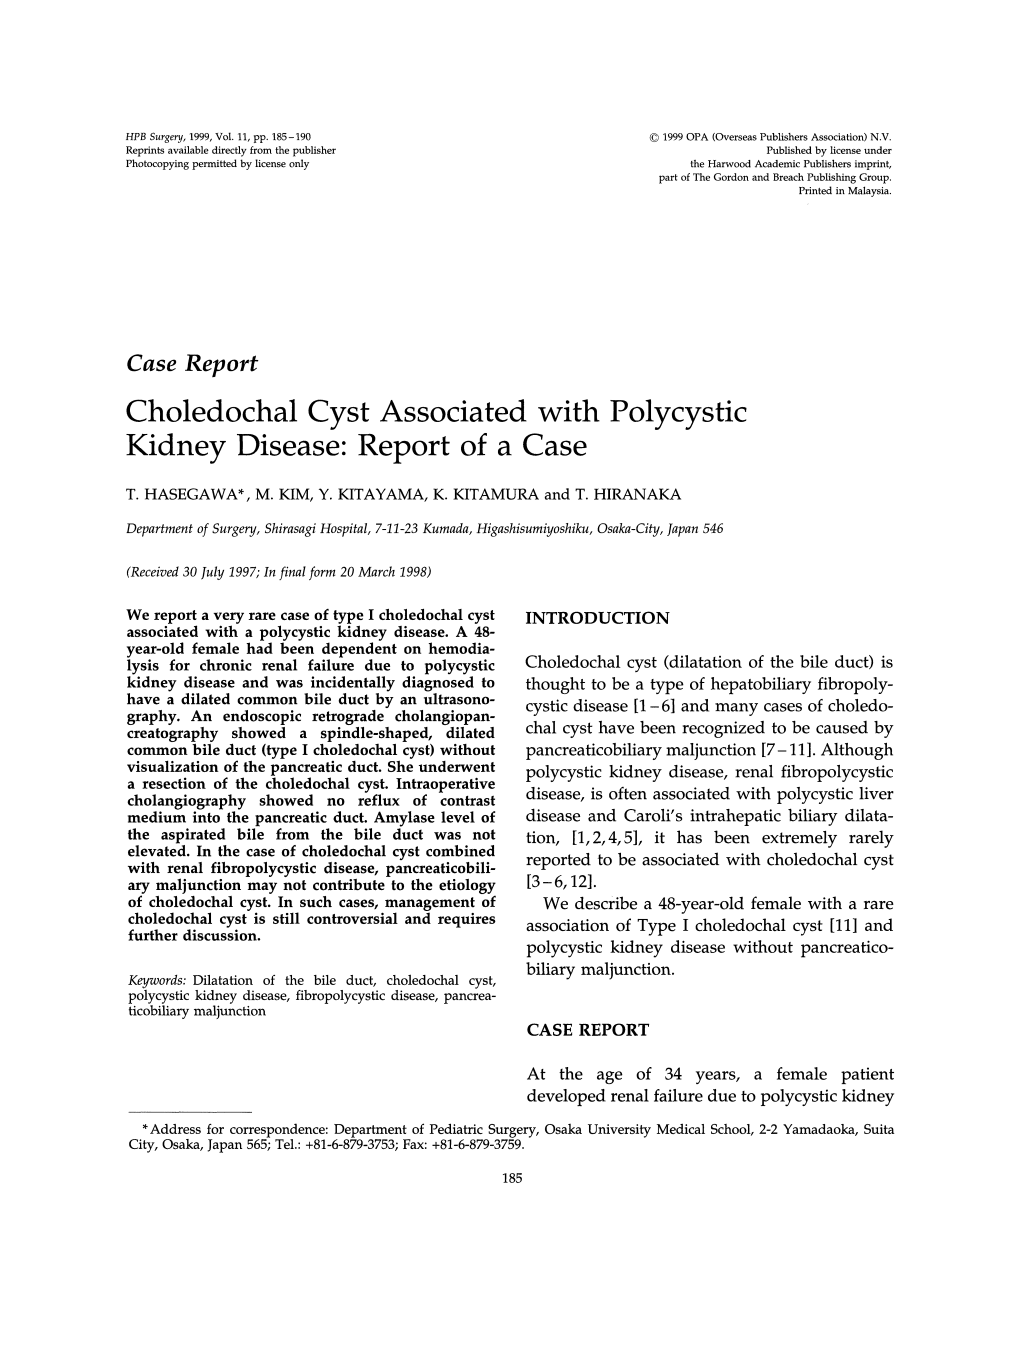 Choledochal Cyst Associated with Polycystic Kidney Disease" Report of a Case